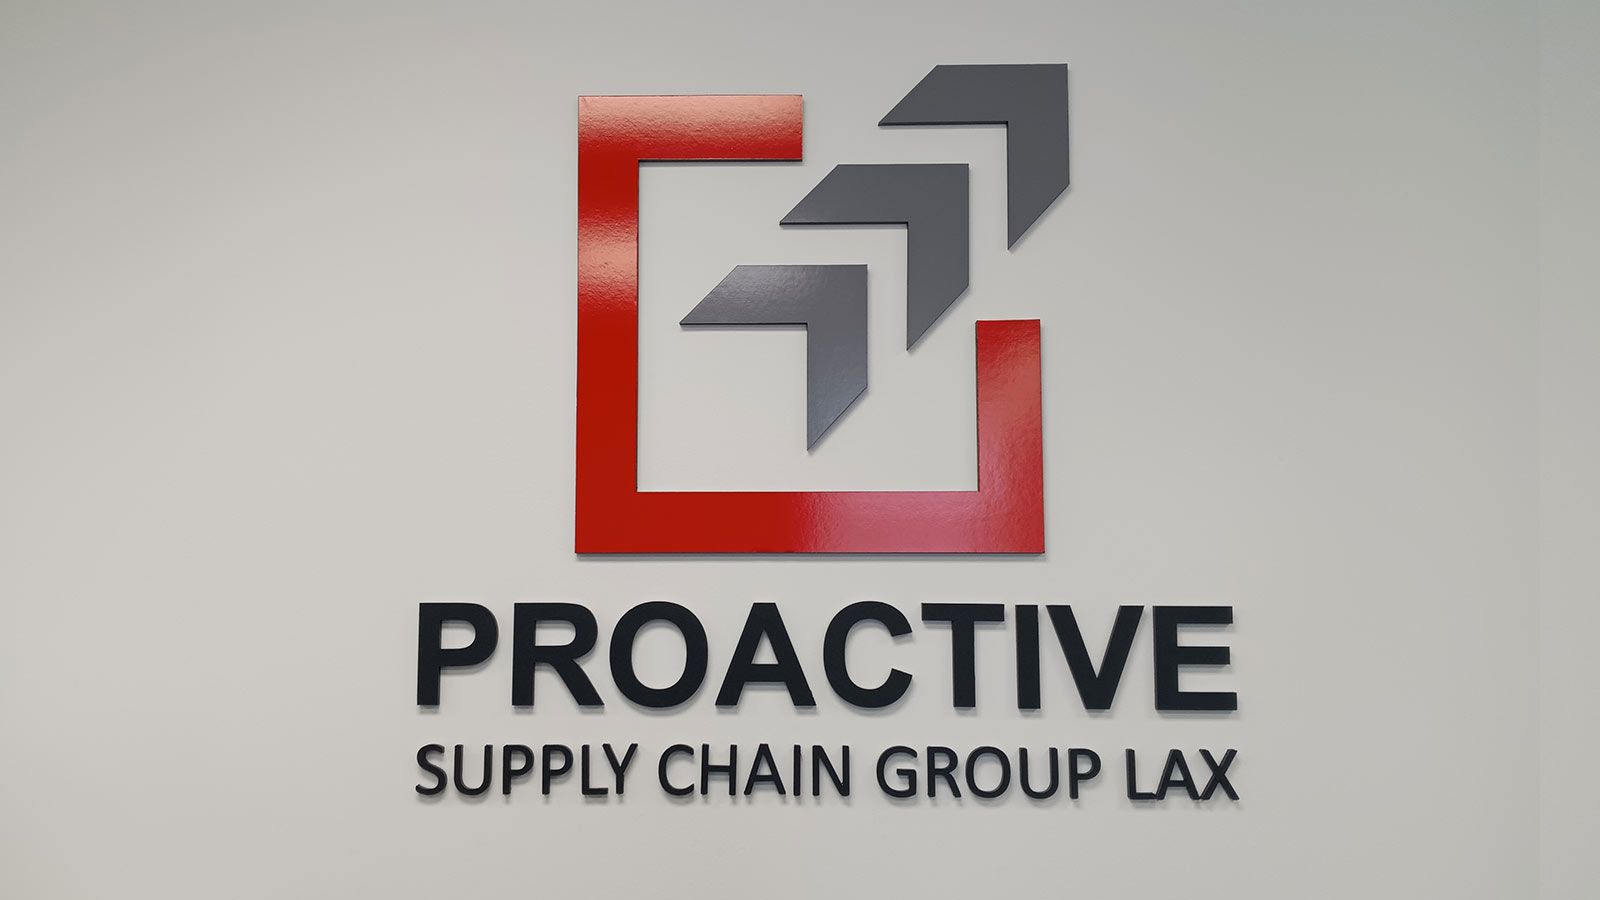 Proactive Supply Chain Group Lax foam sign